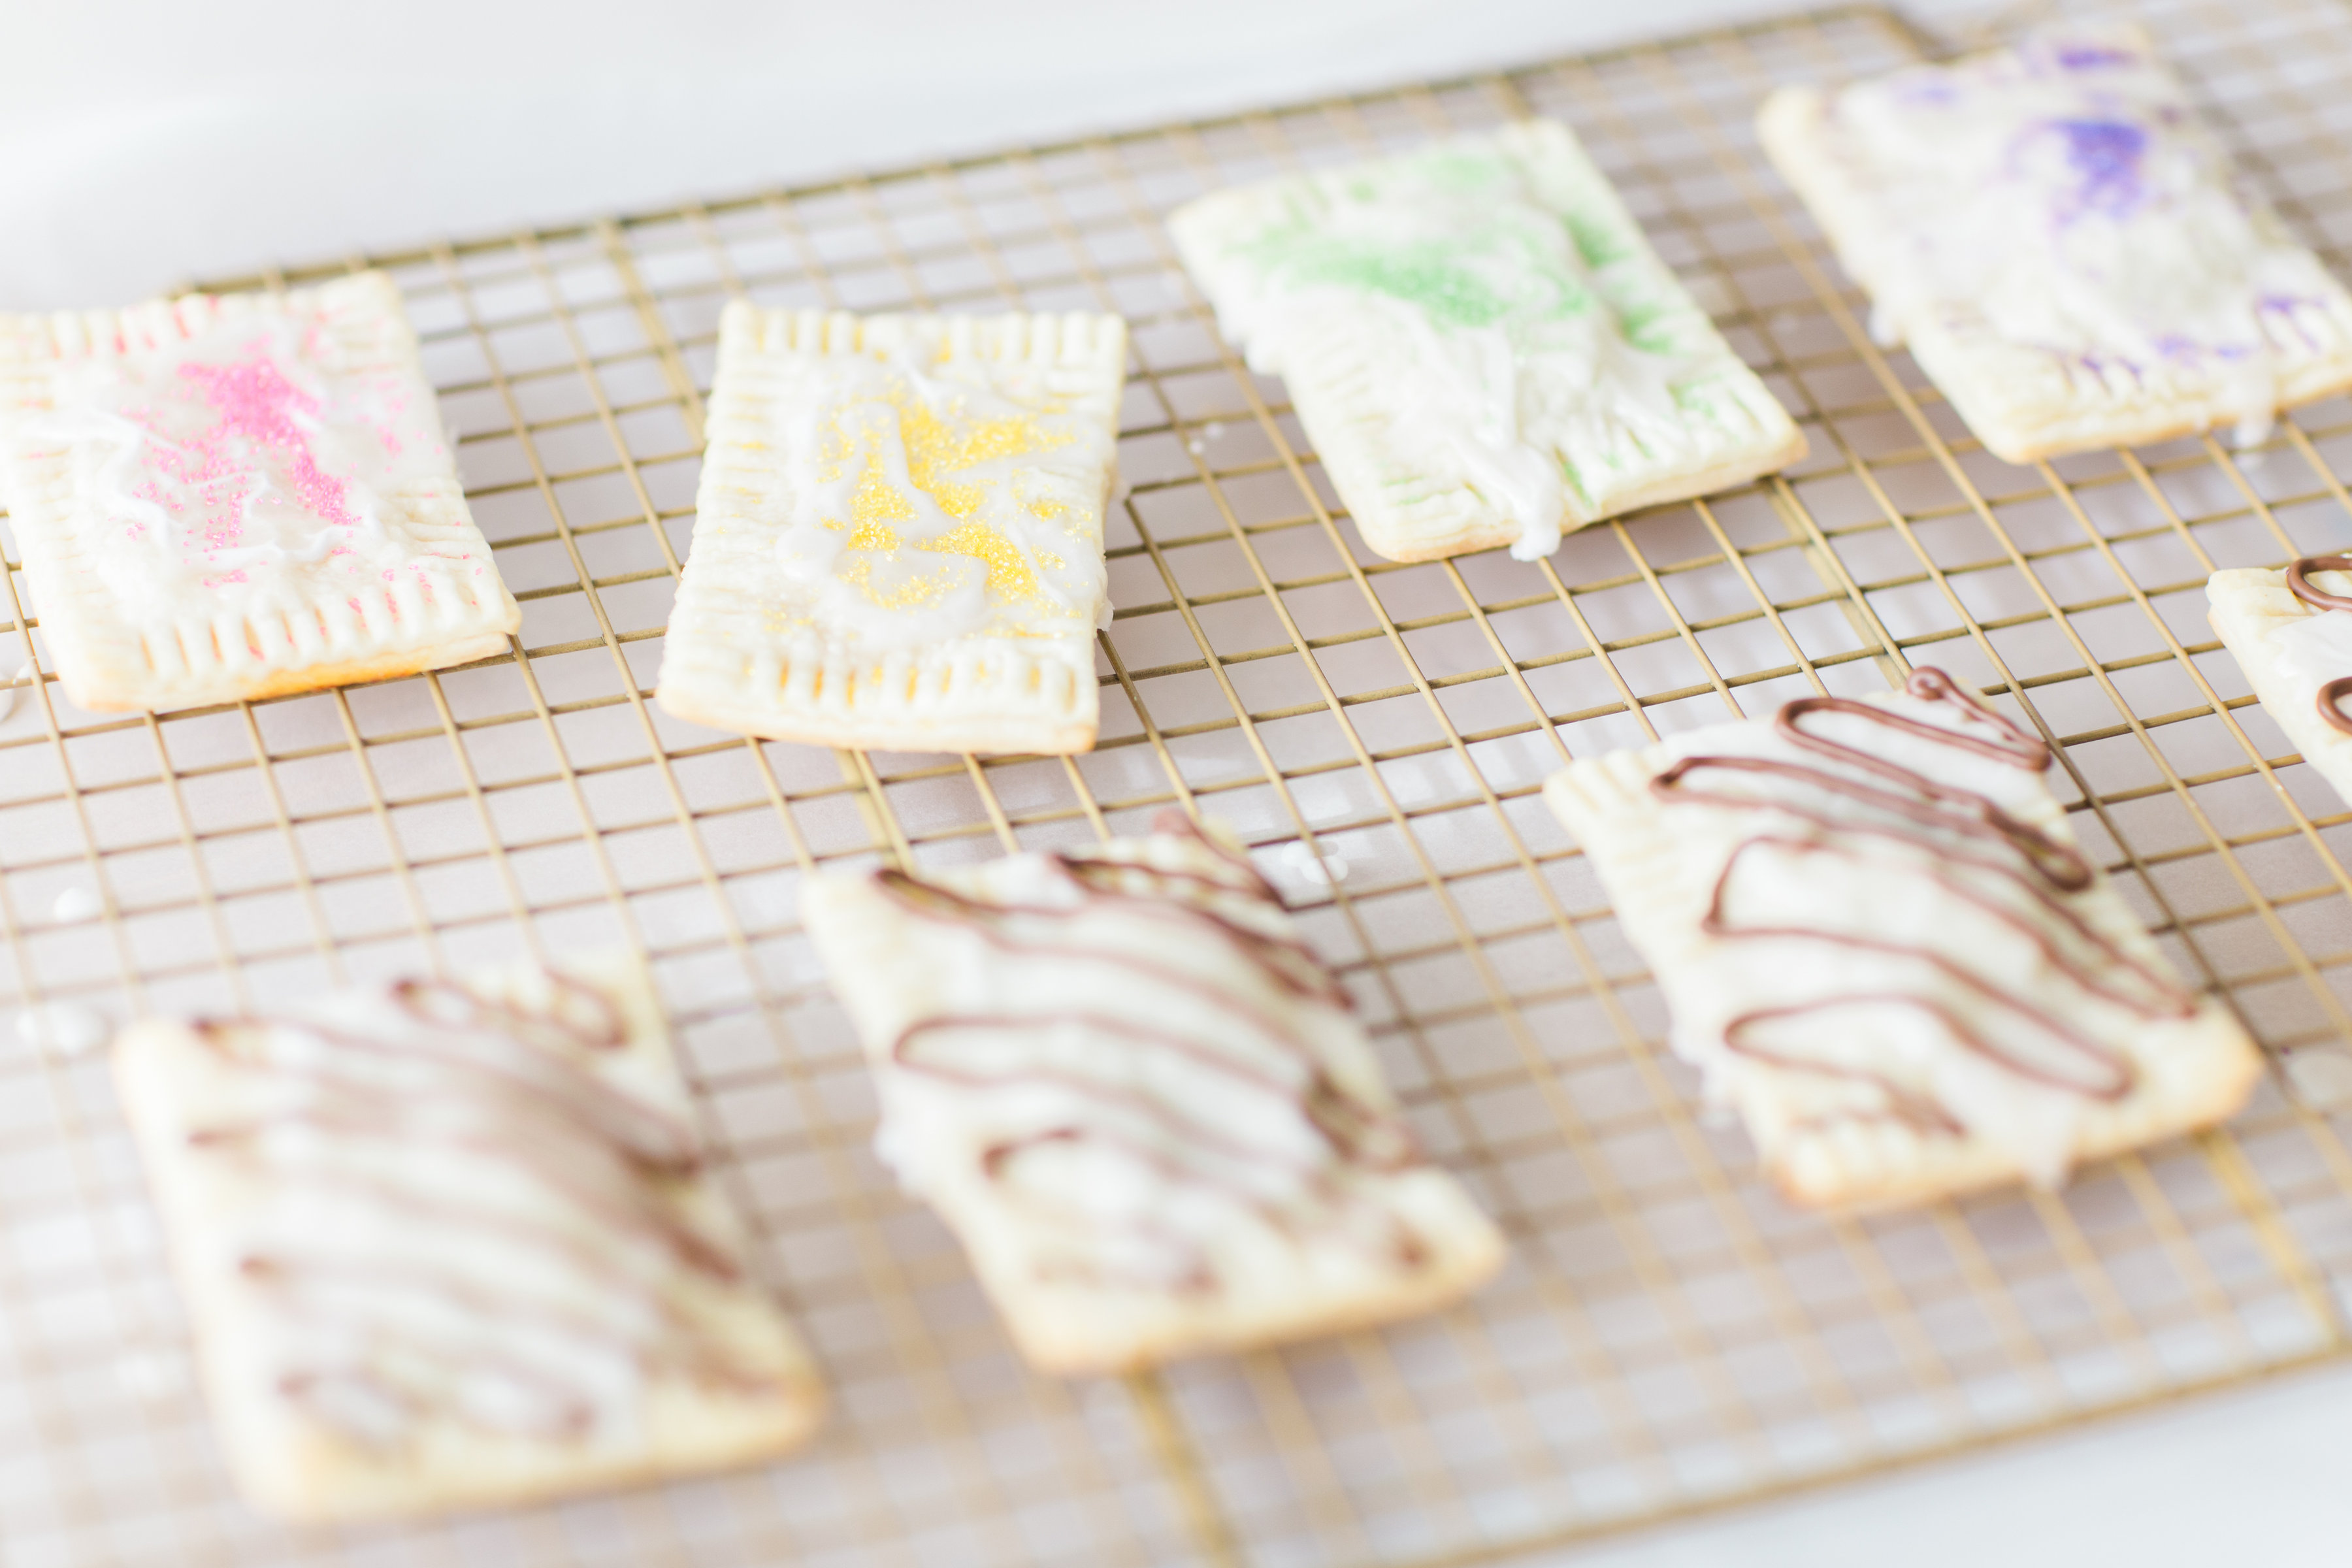 How to Make 3-Ingredient Homemade Pop-Tarts; including a vegan version! Kids LOVE making these. Click through for the simple recipe. | glitterinc.com | @glitterinc